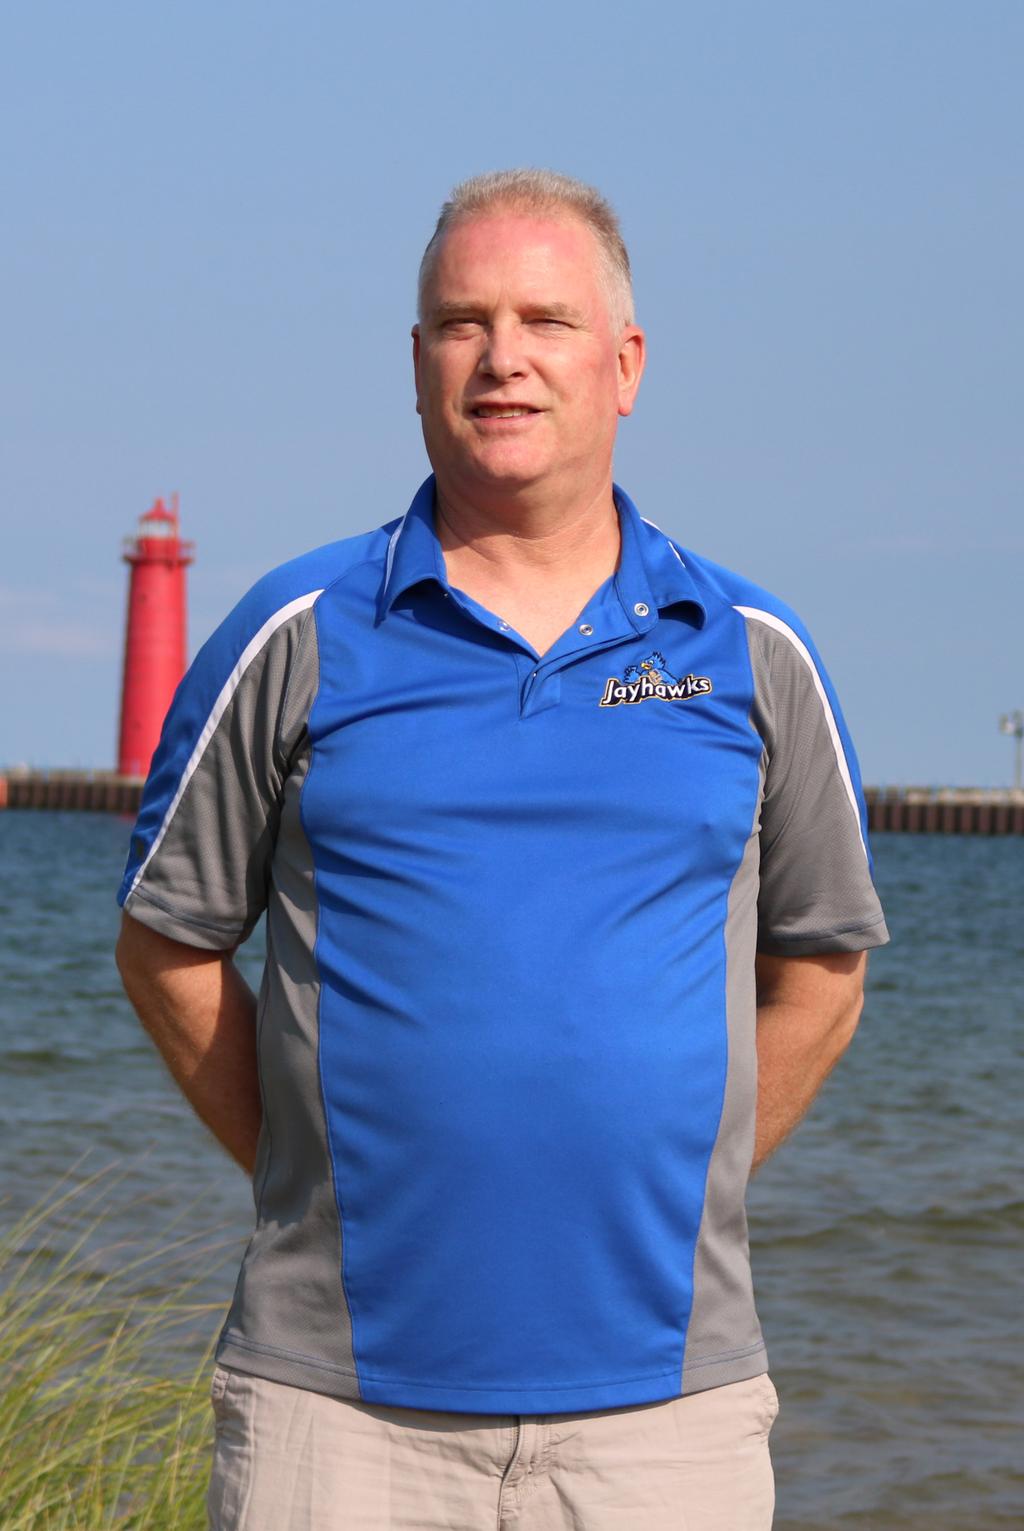 Women s Volleyball Head Coach Rick Rykse begins his 8th season as the head coach at Muskegon Community College and 9th season overall as part of the Jayhawks Volleyball Program since first coming to